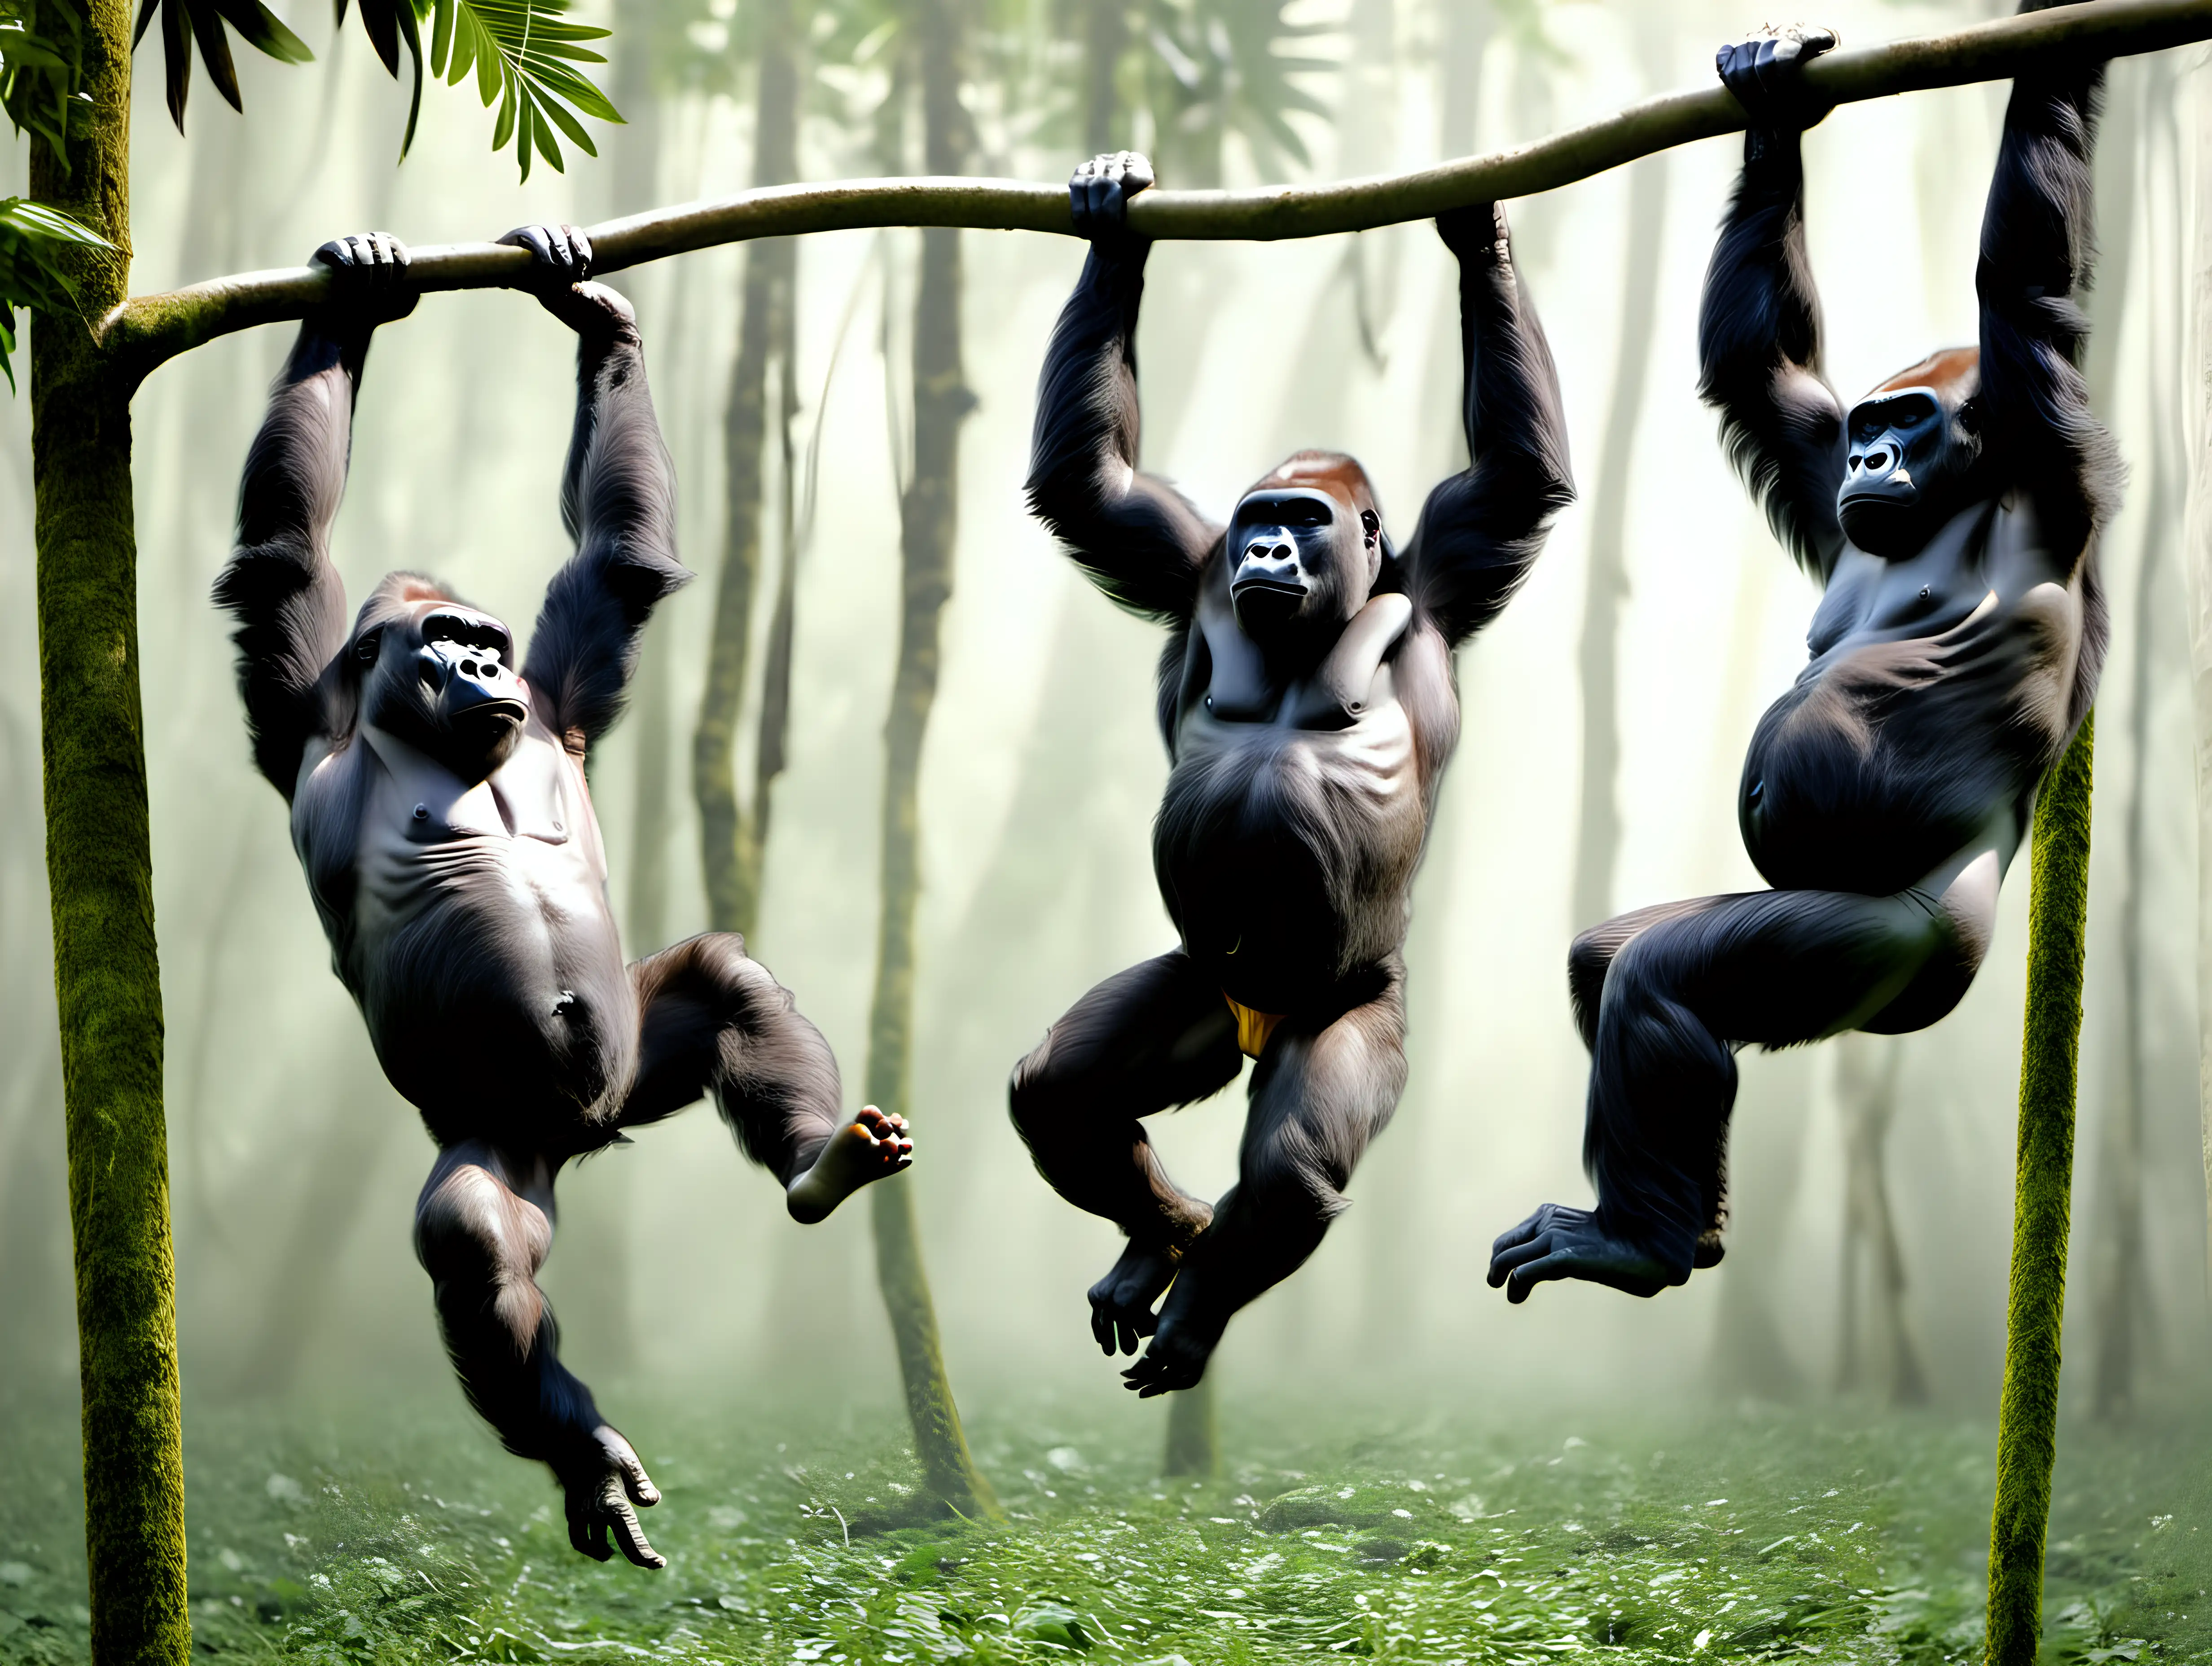 gorillas swinging from trees inrainforest